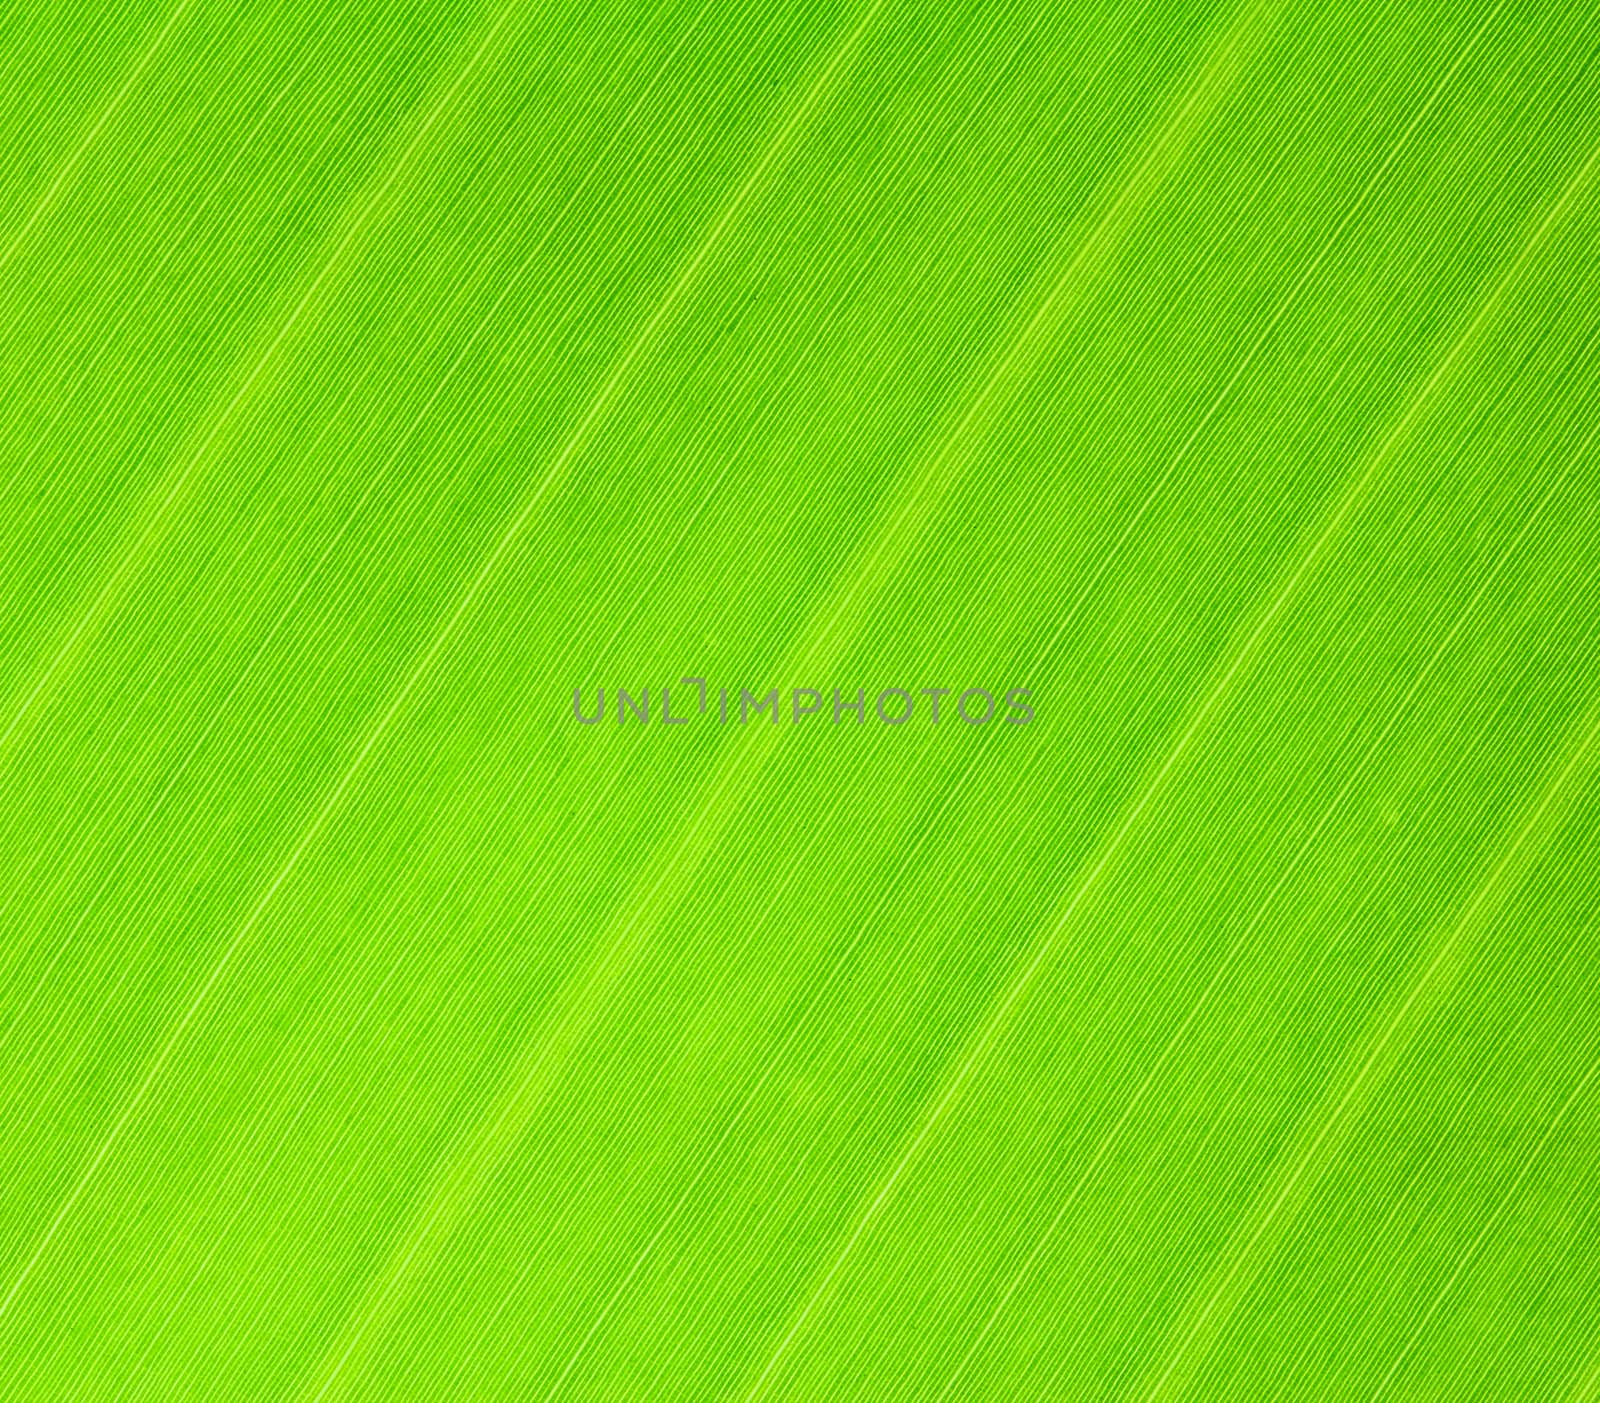 Texture of banana leaf for background